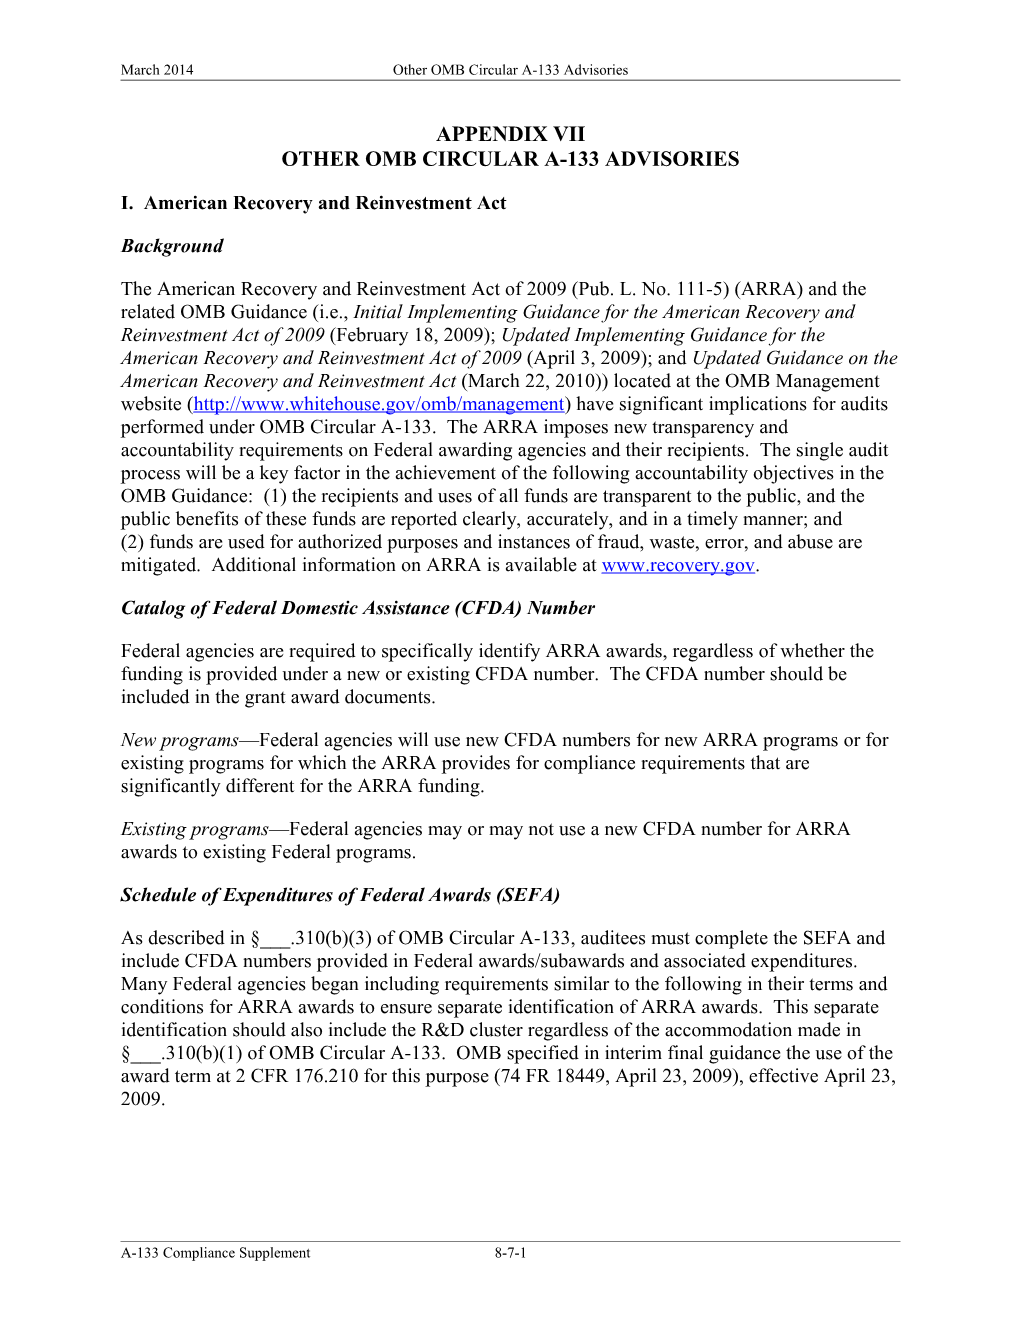 Other Omb Circular A-133 Advisories